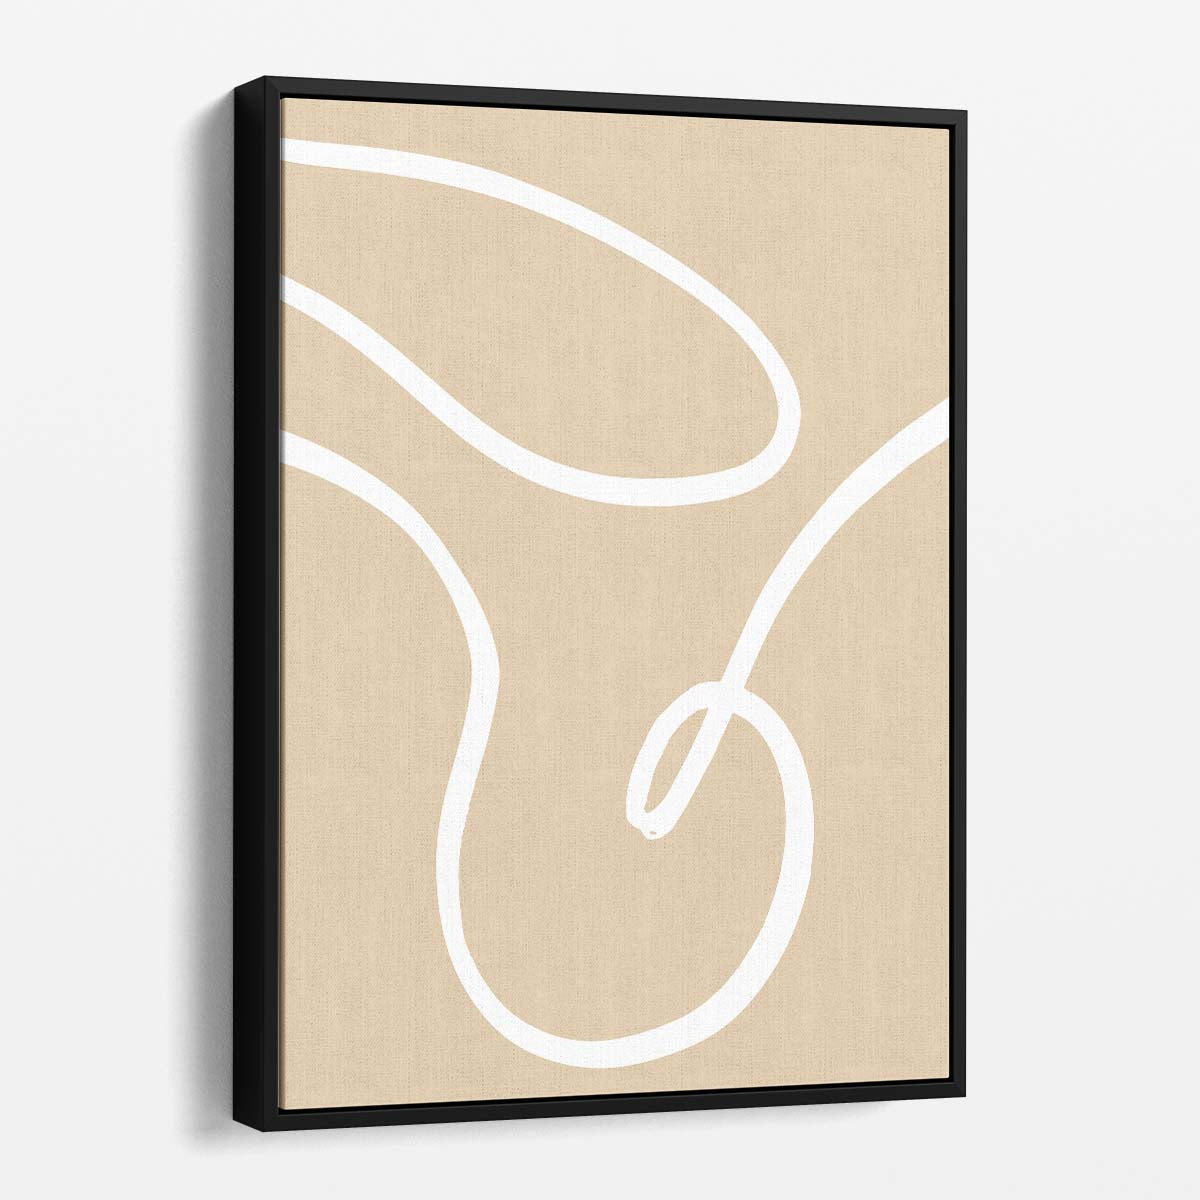 Beige Abstract Line Art Illustration - Graphic Abstraction 02 by Luxuriance Designs, made in USA